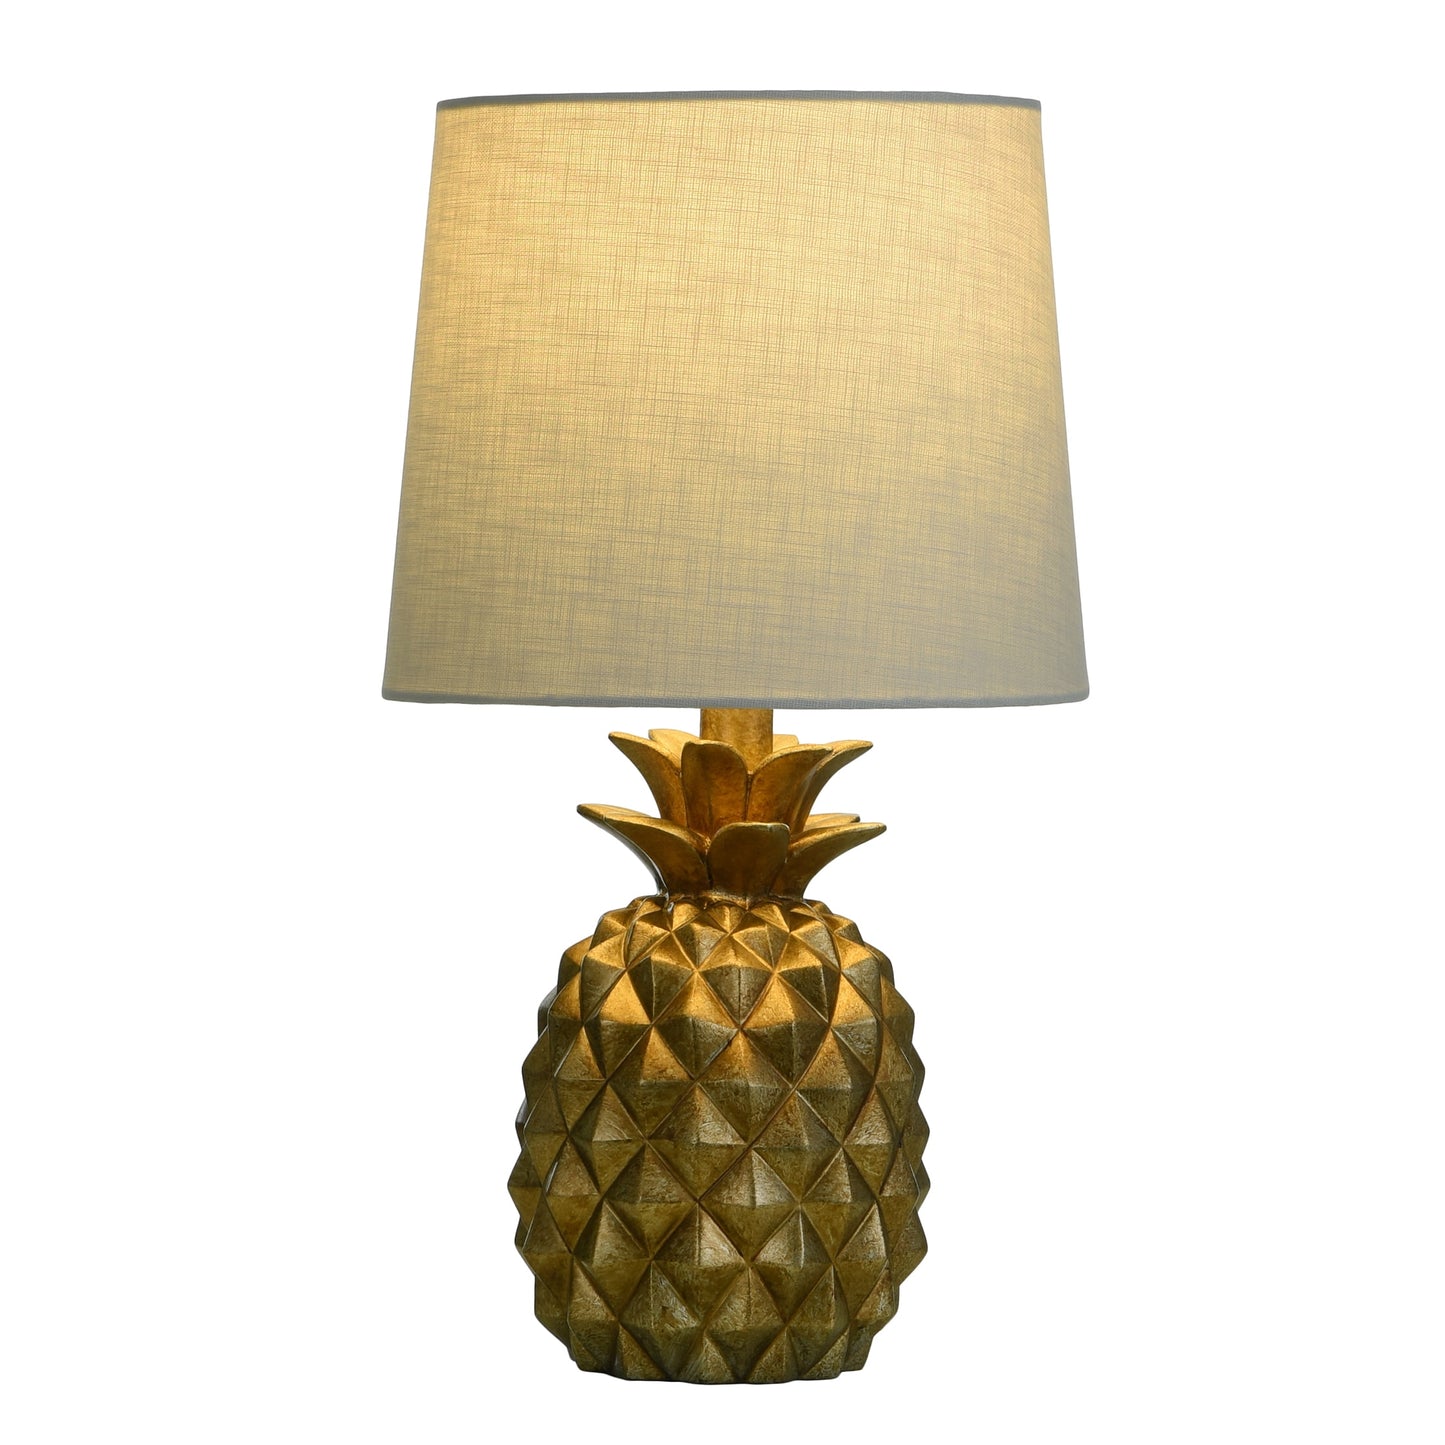 Distressed Pineapple 17” Table Lamp with Empire-Style Shade, Textured Gold